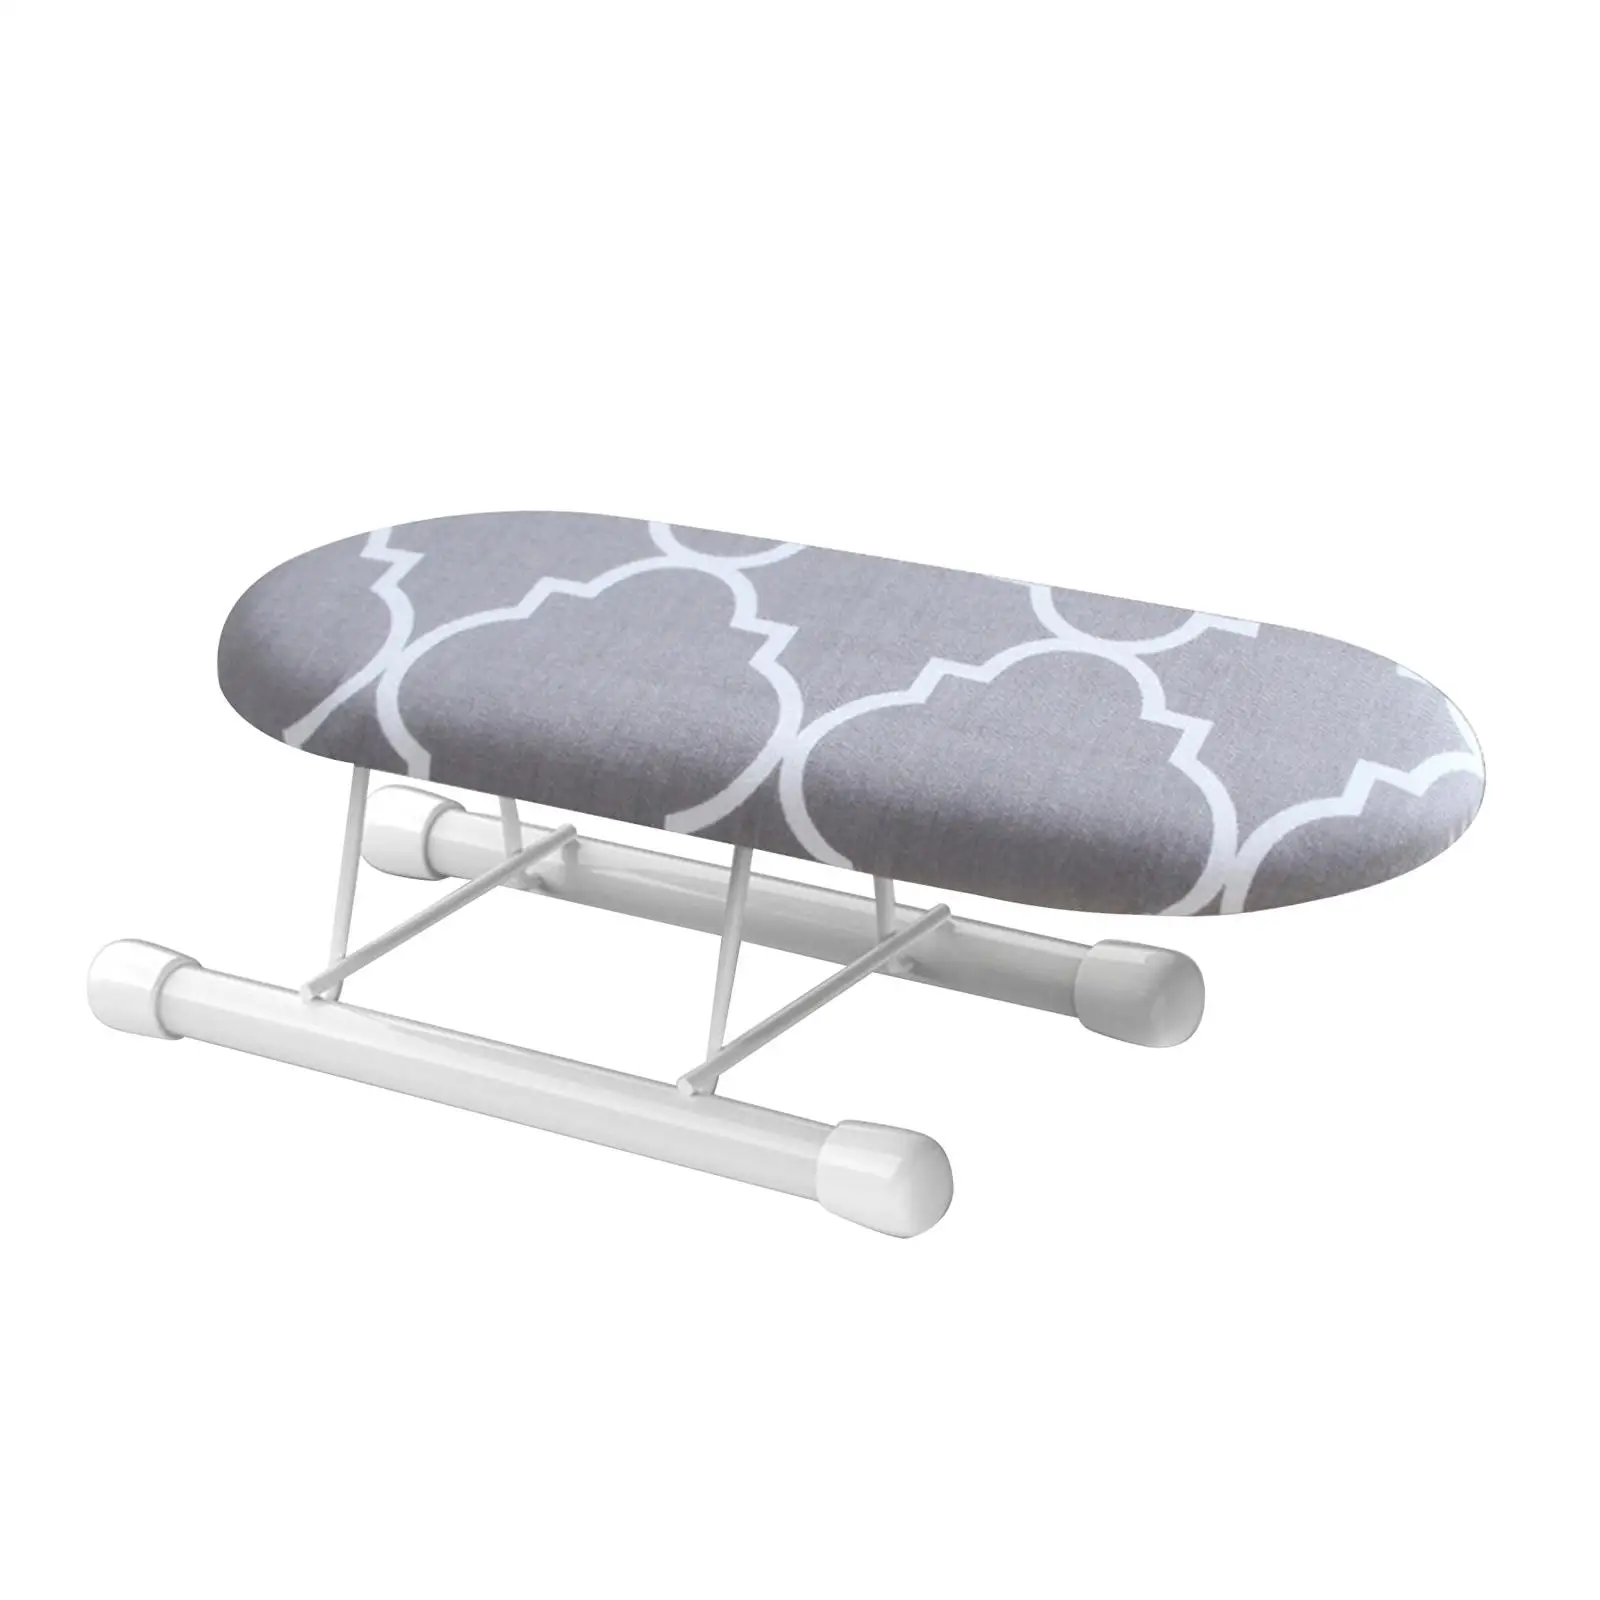 Portable Folding Ironing Board with Folding Legs Ironing Cuffs Neckline Removable Cover for Home Apartments Home